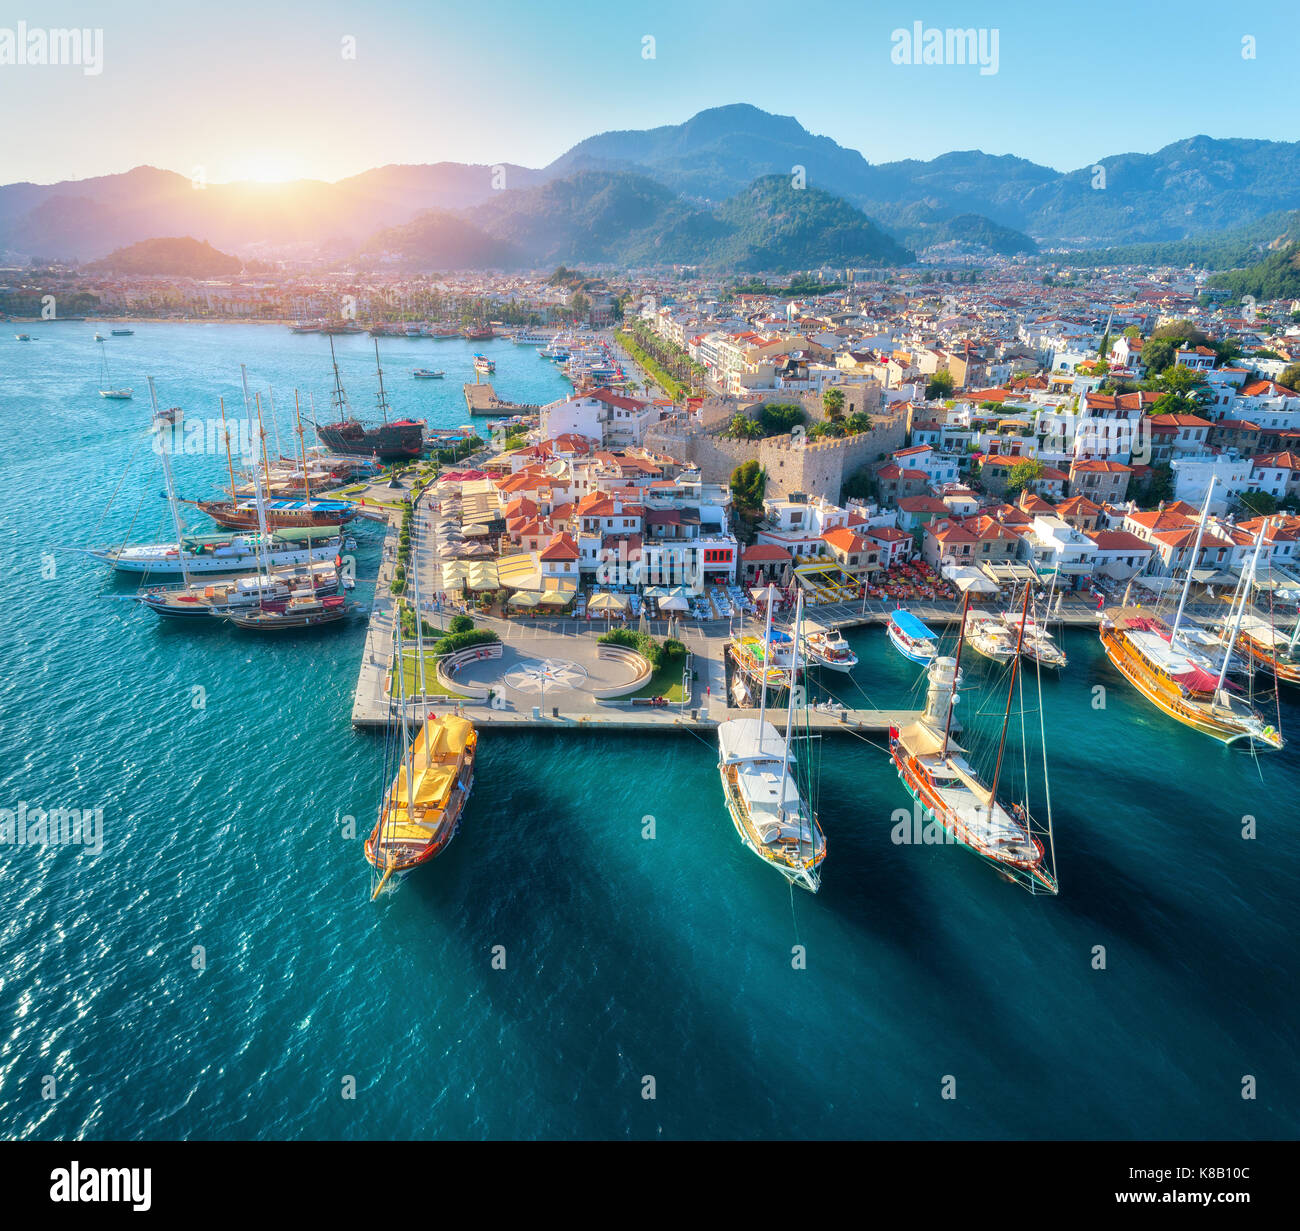 Aerial view of boats and beautiful architecture at sunset in Marmaris, Turkey. Colorful landscape with boats in marina bay, sea, city, mountains. Top  Stock Photo